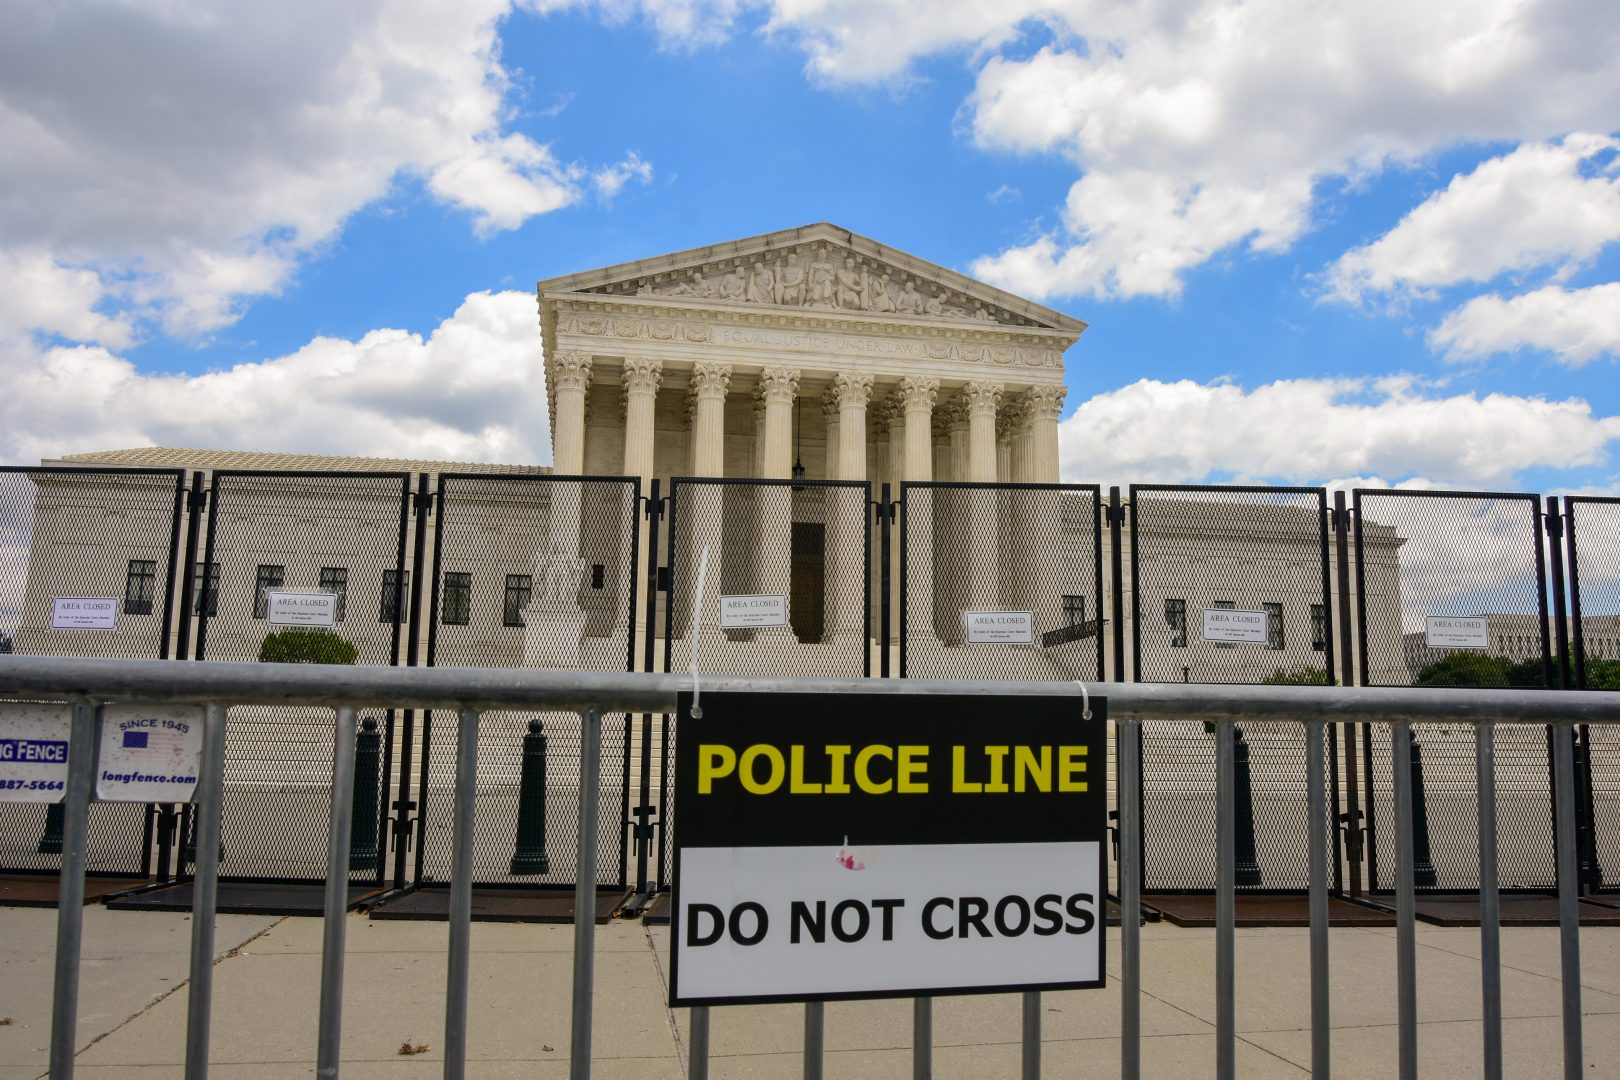 Security fencing surrounds the U.S. Supreme Court building on Capitol Hill in Washington, DC.